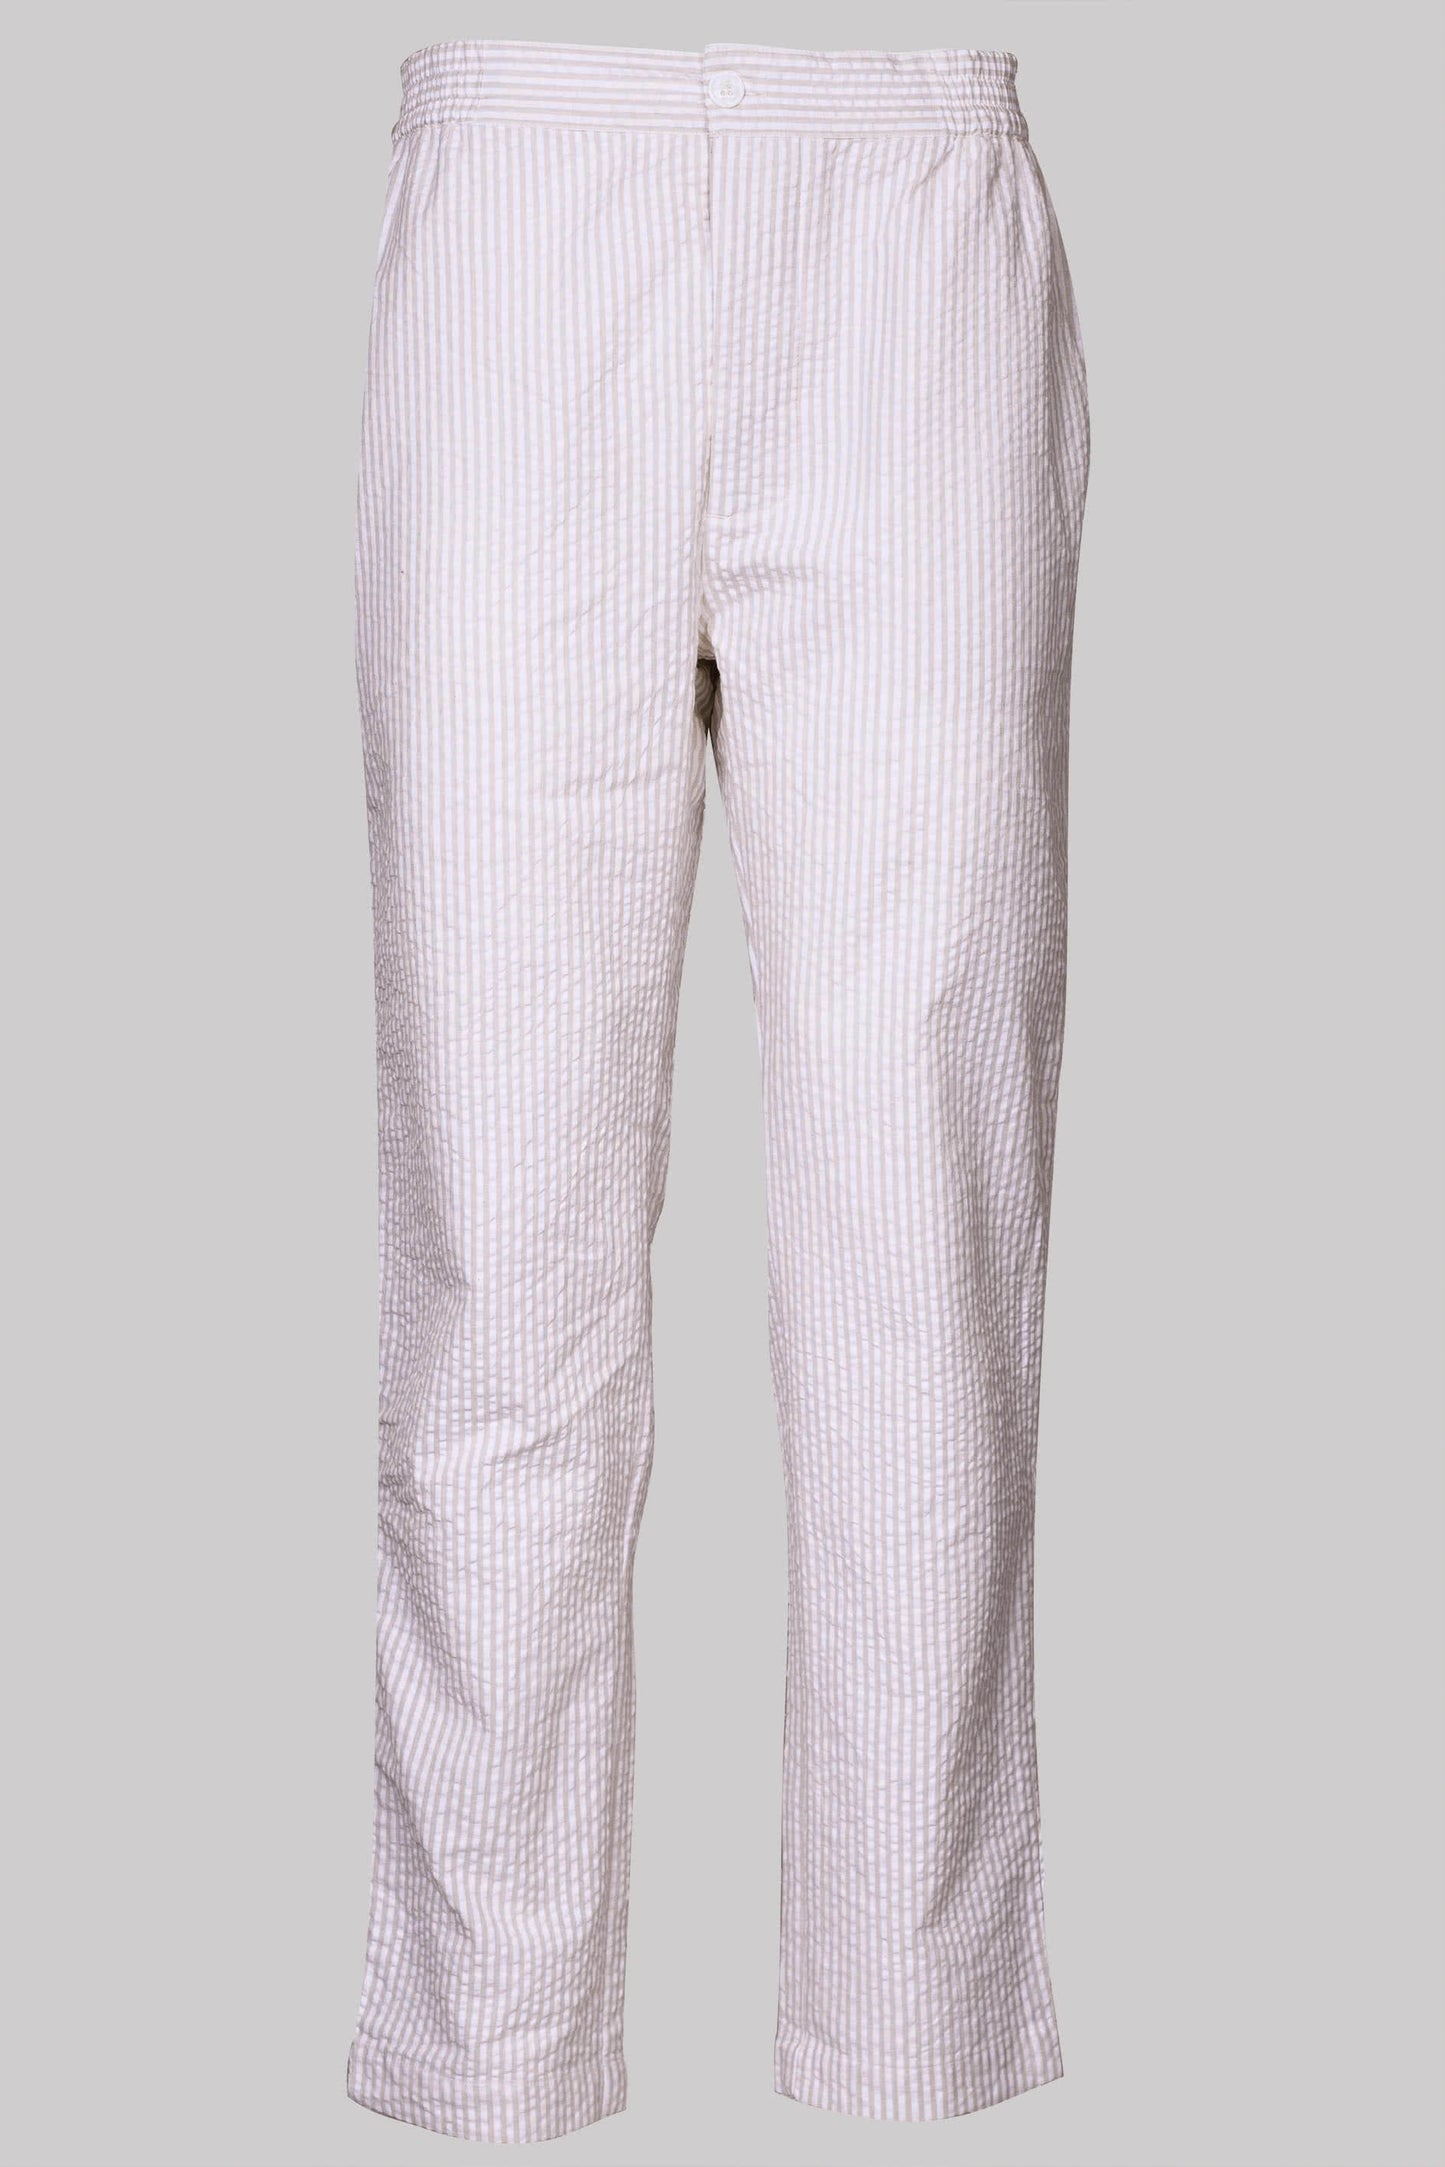 8809 BUTTON-TROUSERS BEIGE-White